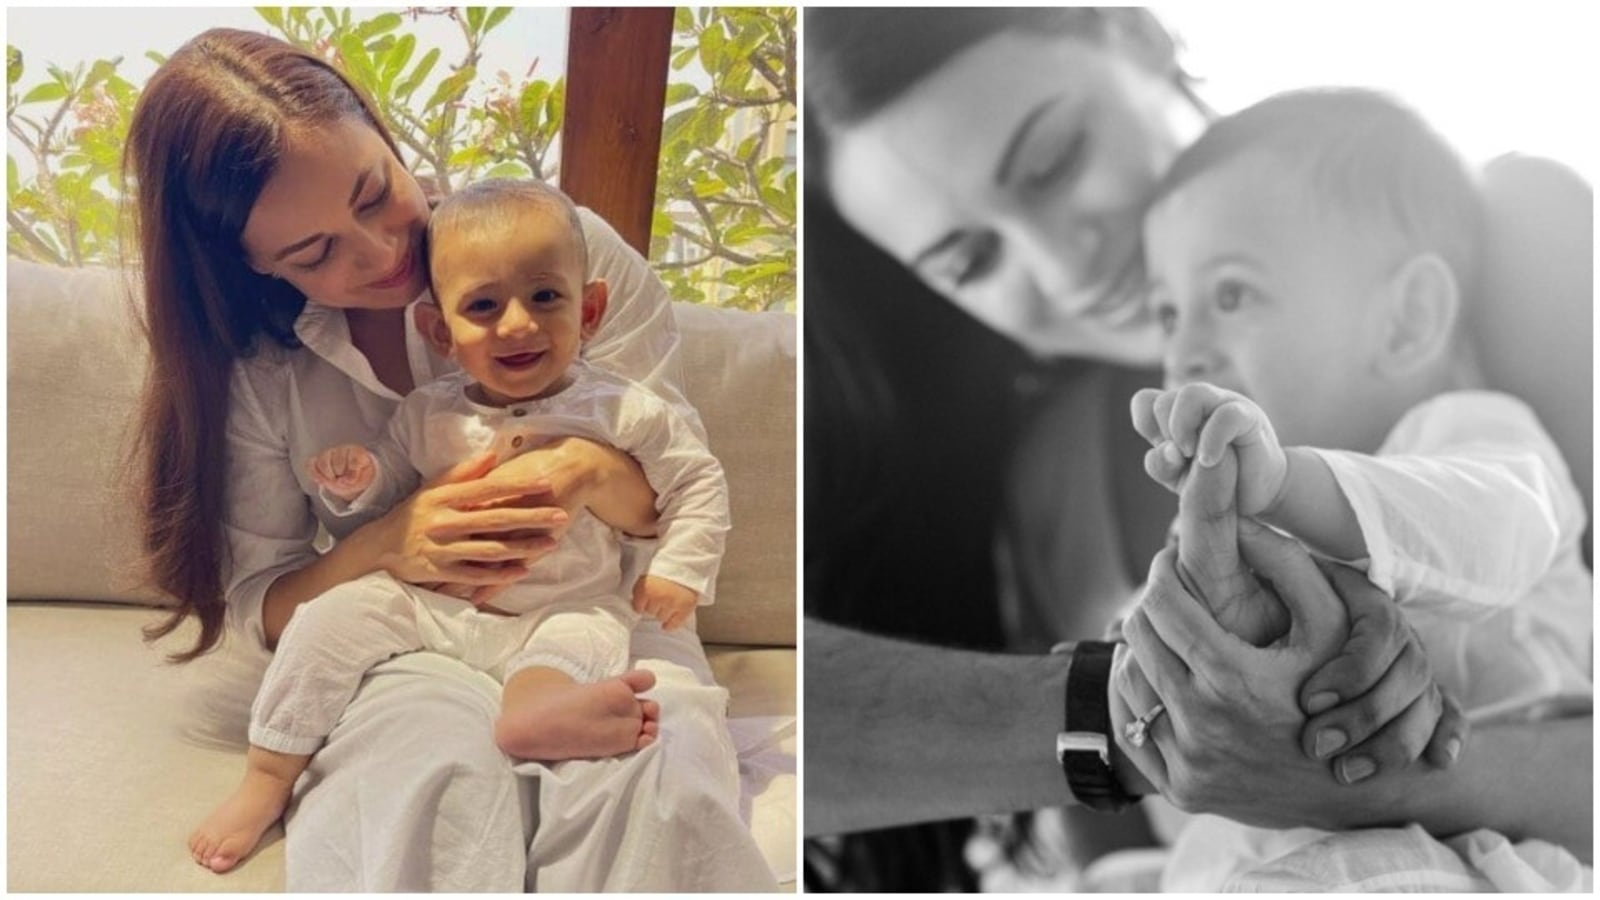 Dia Mirza shares emotional post on son Avyaan’s first birthday, calls him a miracle: ‘Doctors prepared us for worst’